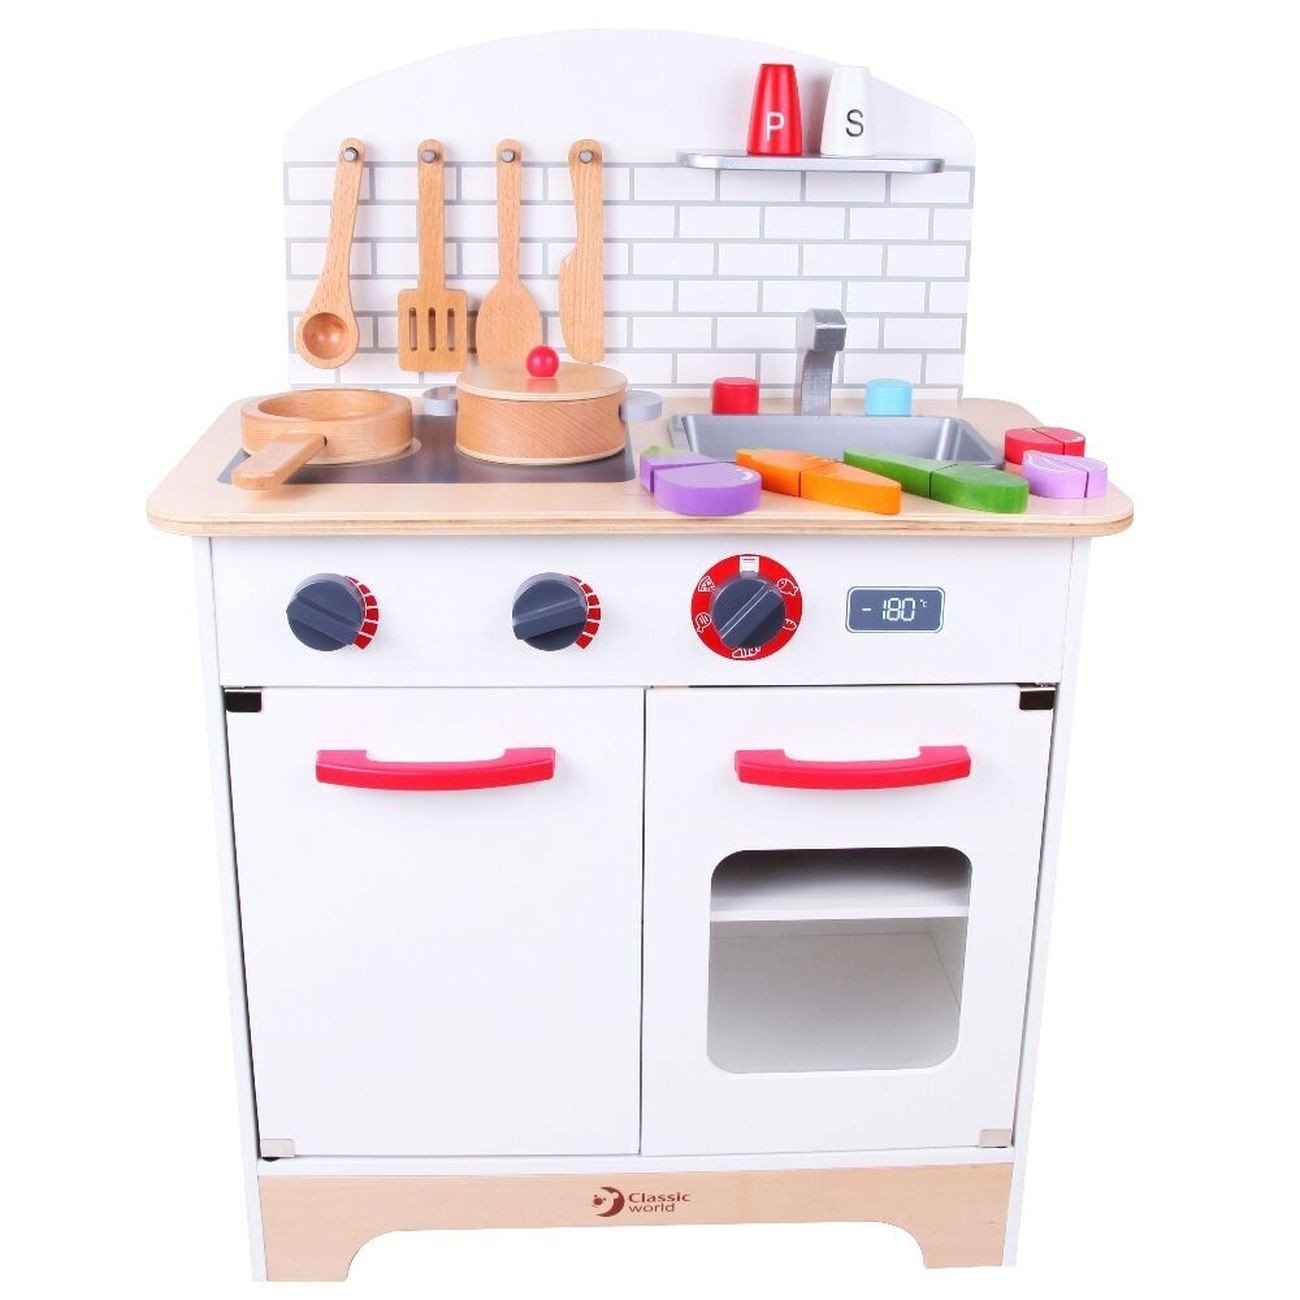 Chef's Kitchen Set Wooden - Toys-Pretend Play : Craniums - Books | Toys | Hobbies | Science